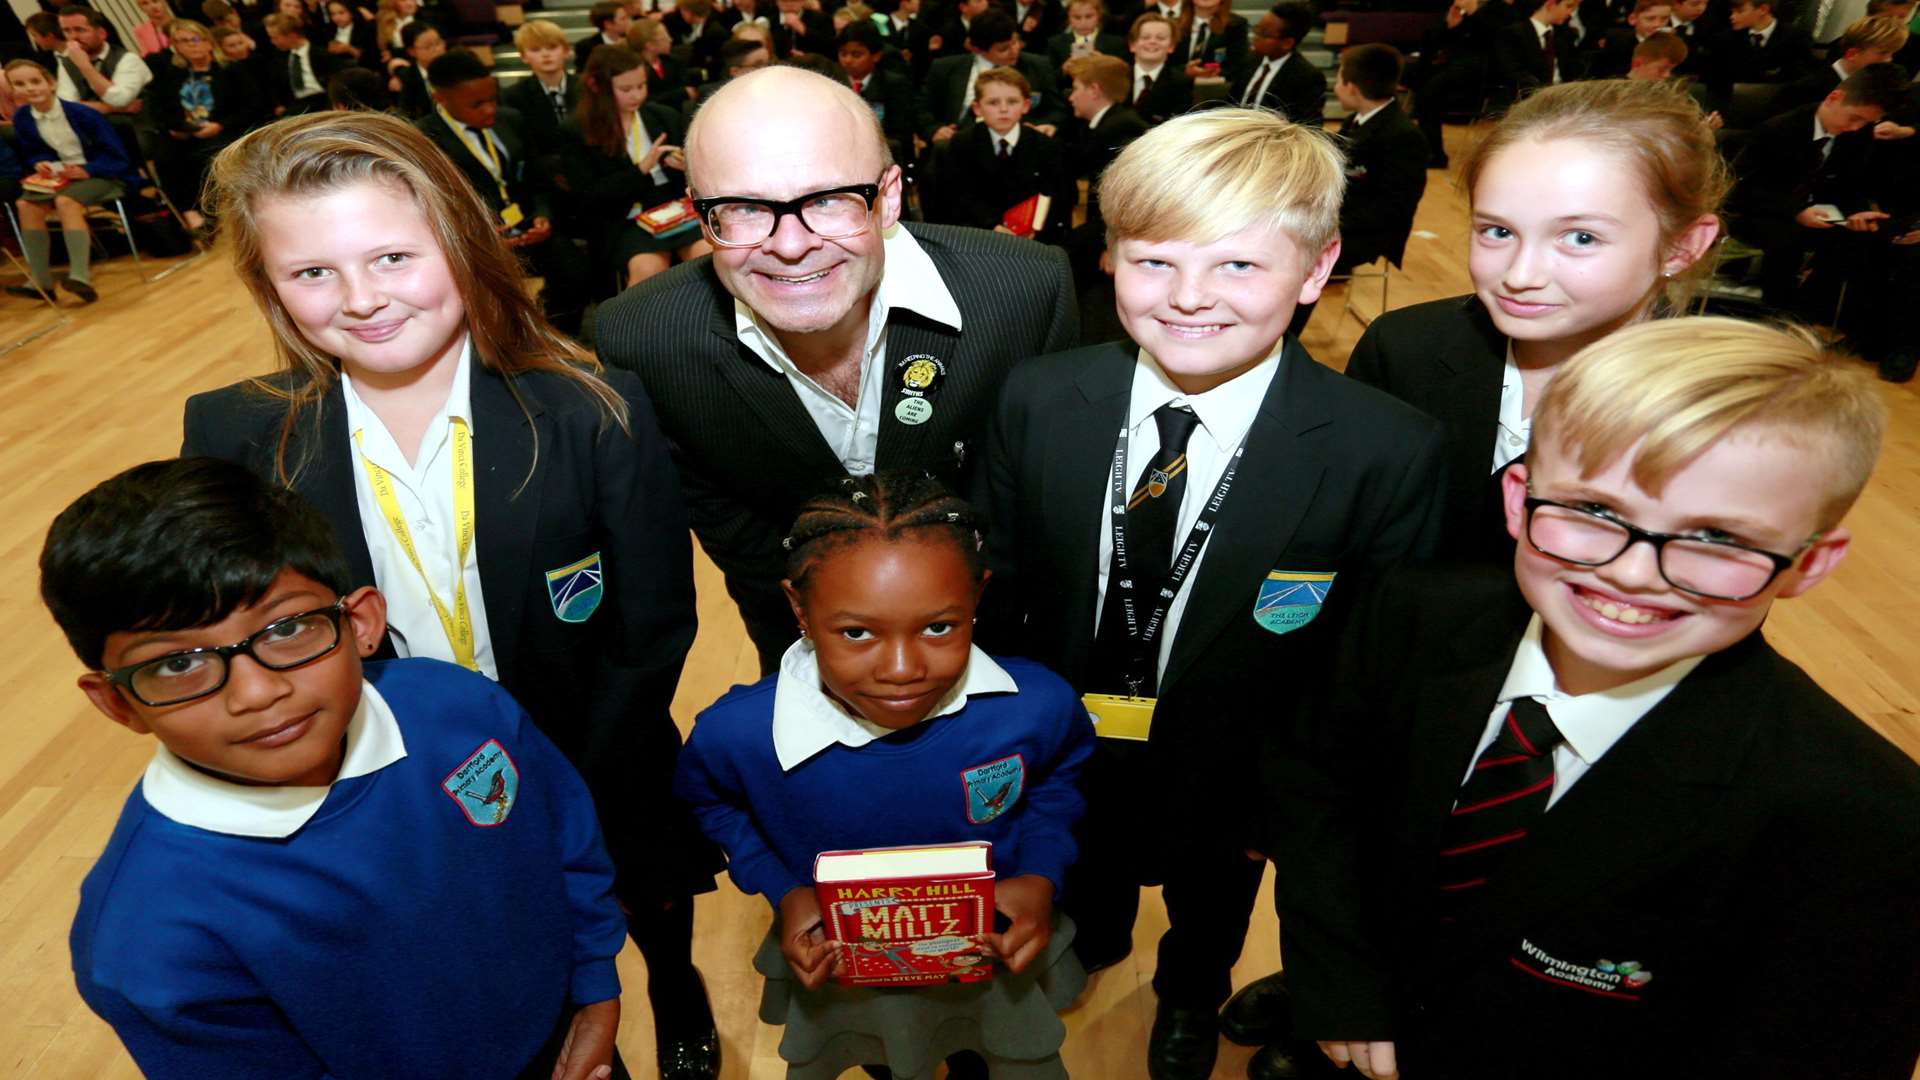 Comedian Harry Hill visited Willmington Academy on Monday, to chat to pupils from both the academy and schools in the Leigh Trust, about his new childrens book, Matt Millz